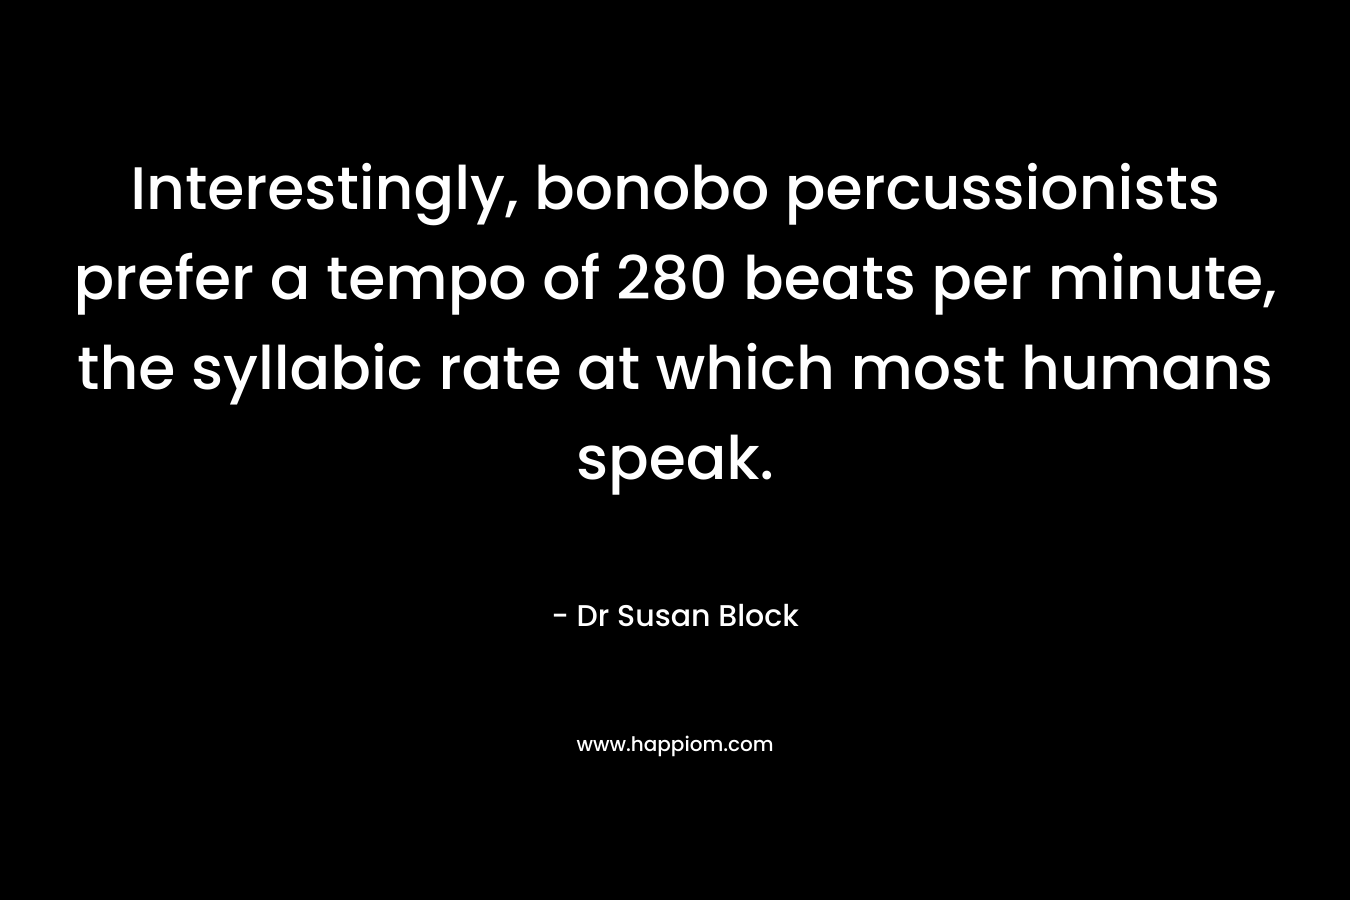 Interestingly, bonobo percussionists prefer a tempo of 280 beats per minute, the syllabic rate at which most humans speak.